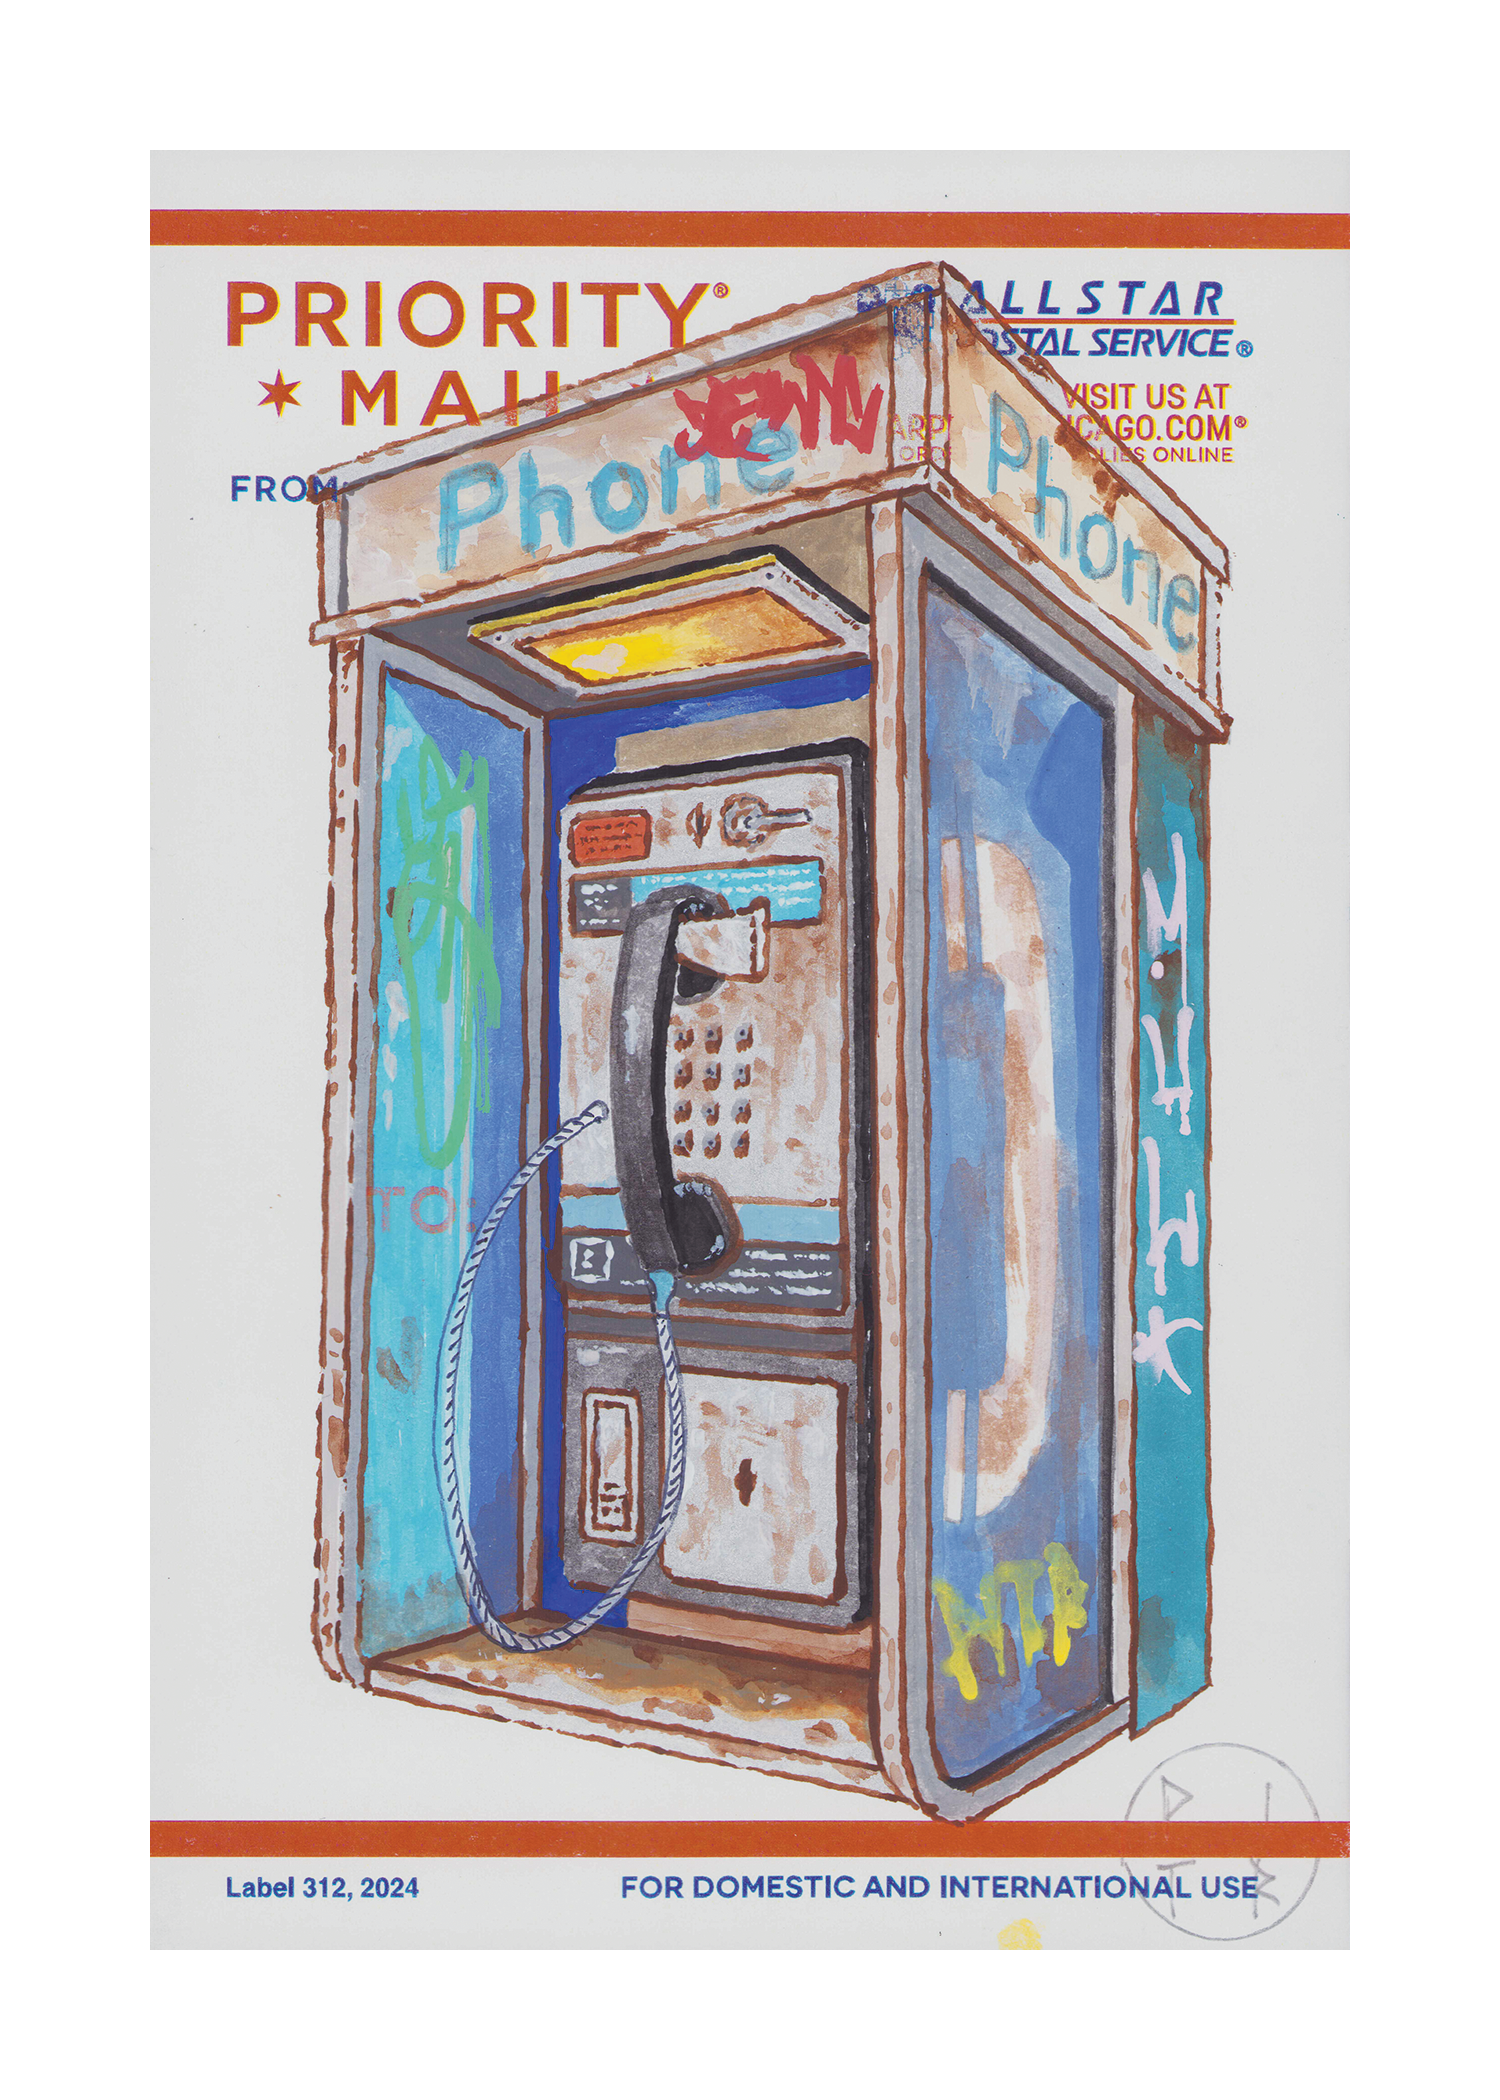 146. Pay Phone by Pizza in the Rain